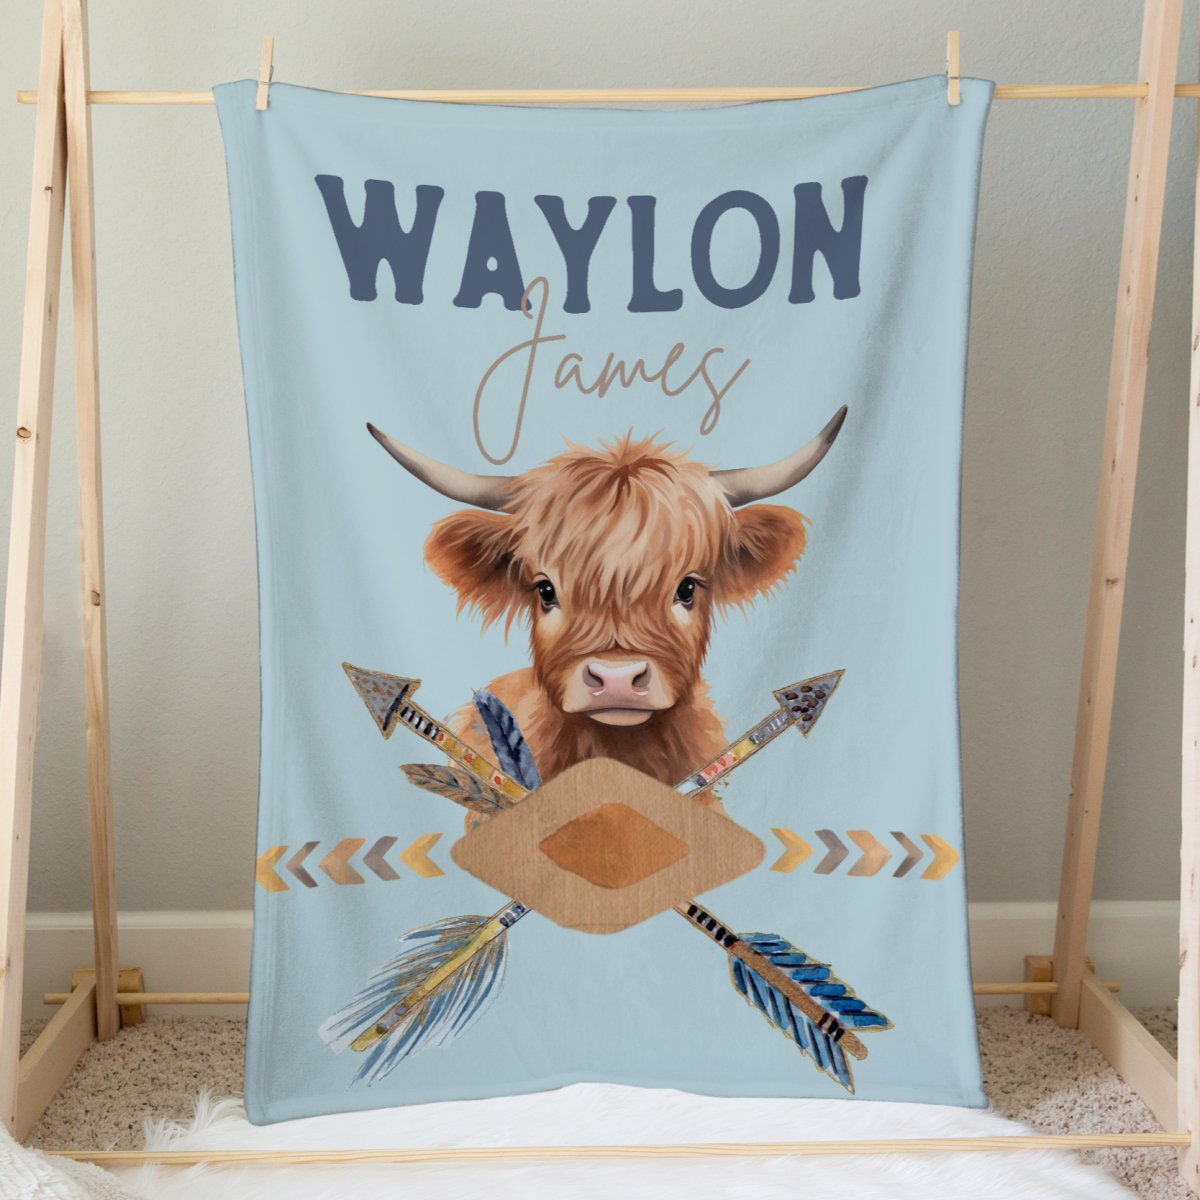 Blue Highland Cow & Ikat Personalized Crib Bedding - Blue Highland Cow, gender_boy, text